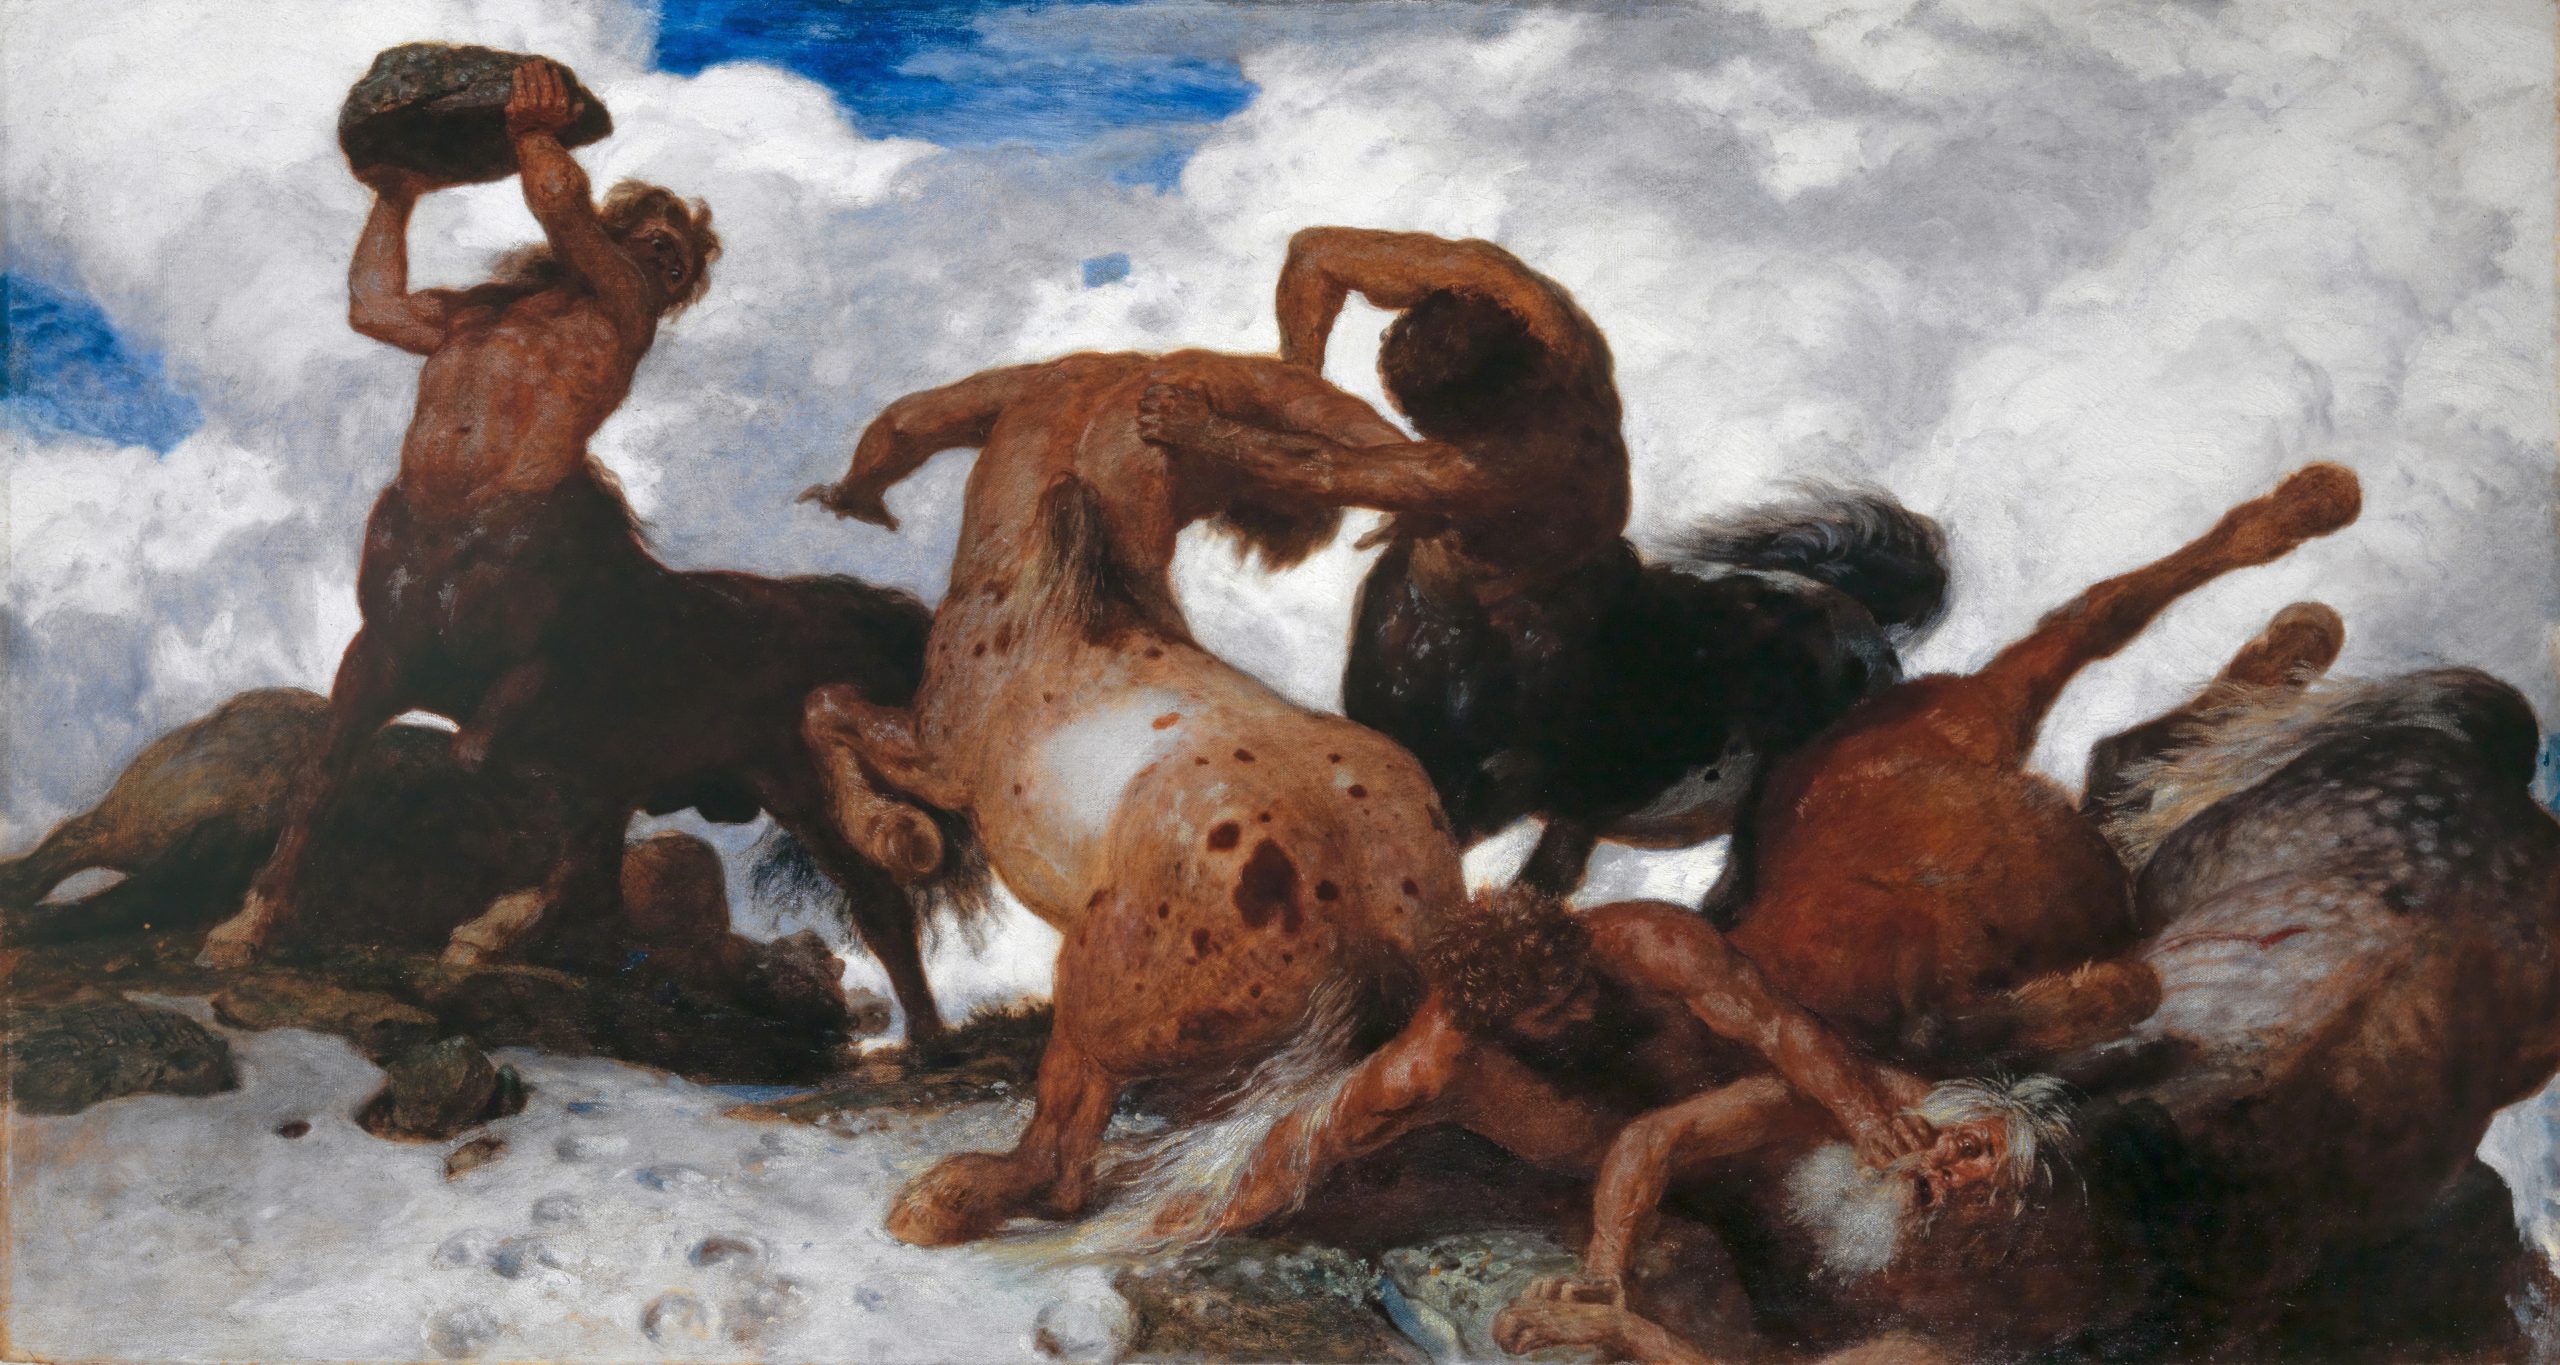 A group of centaurs fight in a battle on a pile of rocks in the clouds.